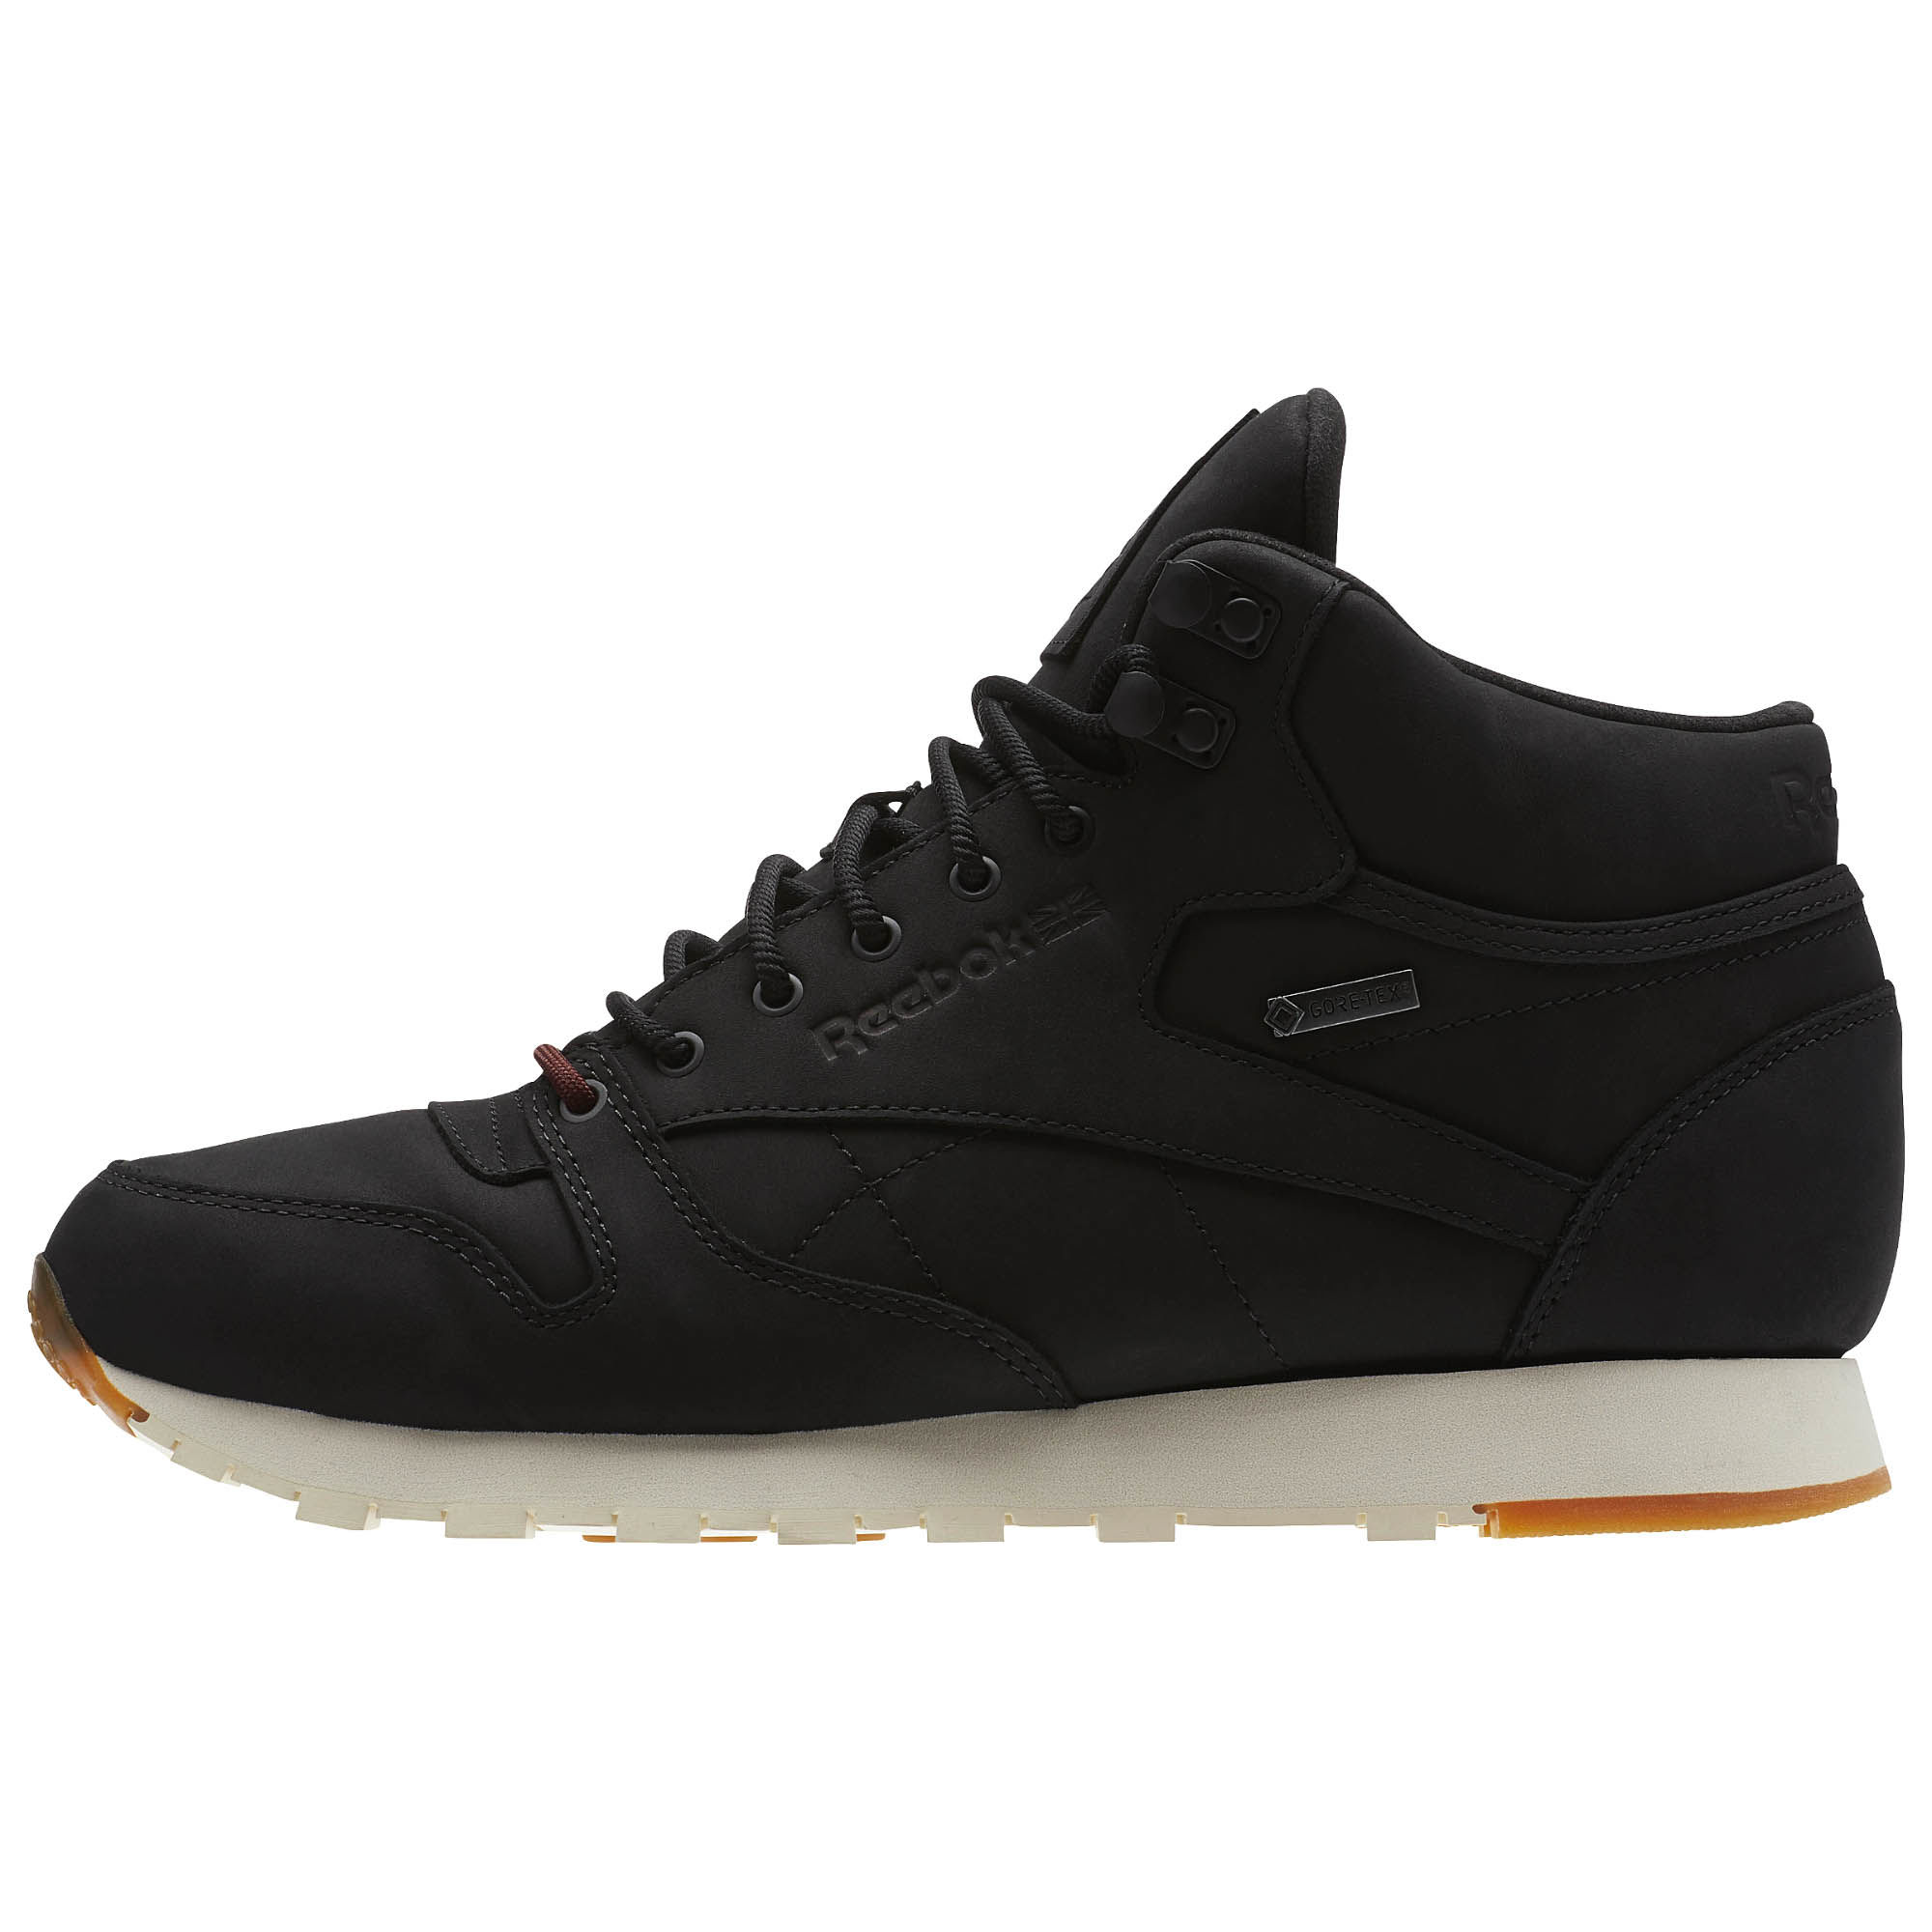 reebok classic leather mid gore-tex thinsulate black 2